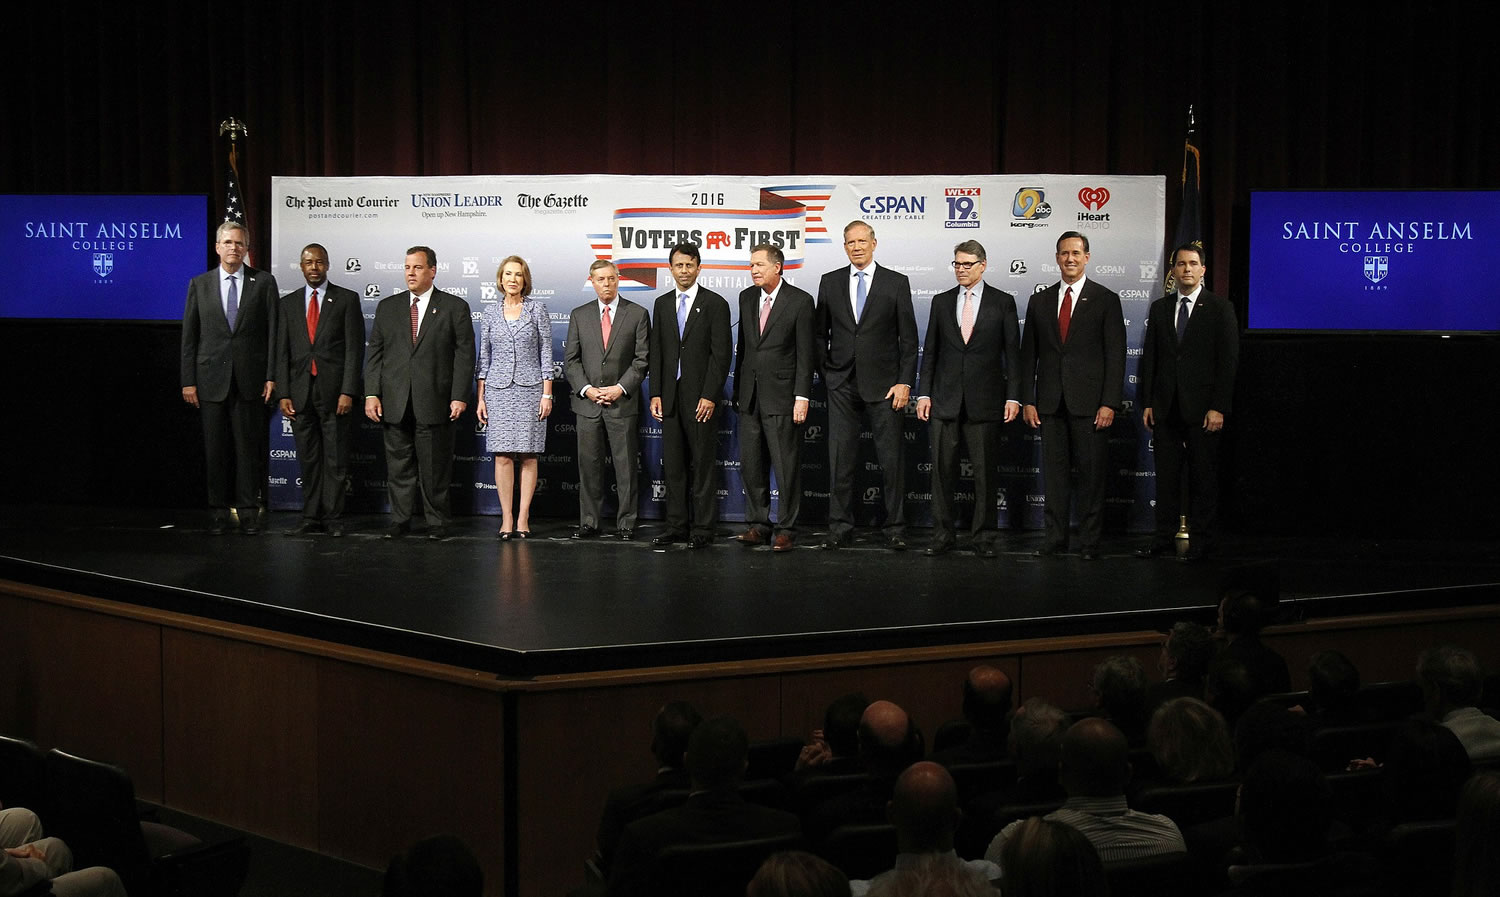 Republican presidential candidates -- Jeb Bush, from left, Ben Carson, Chris Christie, Carly Fiorina, Lindsey Graham, Bobby Jindal, John Kasich, George Pataki, Rick Perry, Rick Santorum and Scott Walker -- gather on stage Monday before a forum in Manchester, N.H.